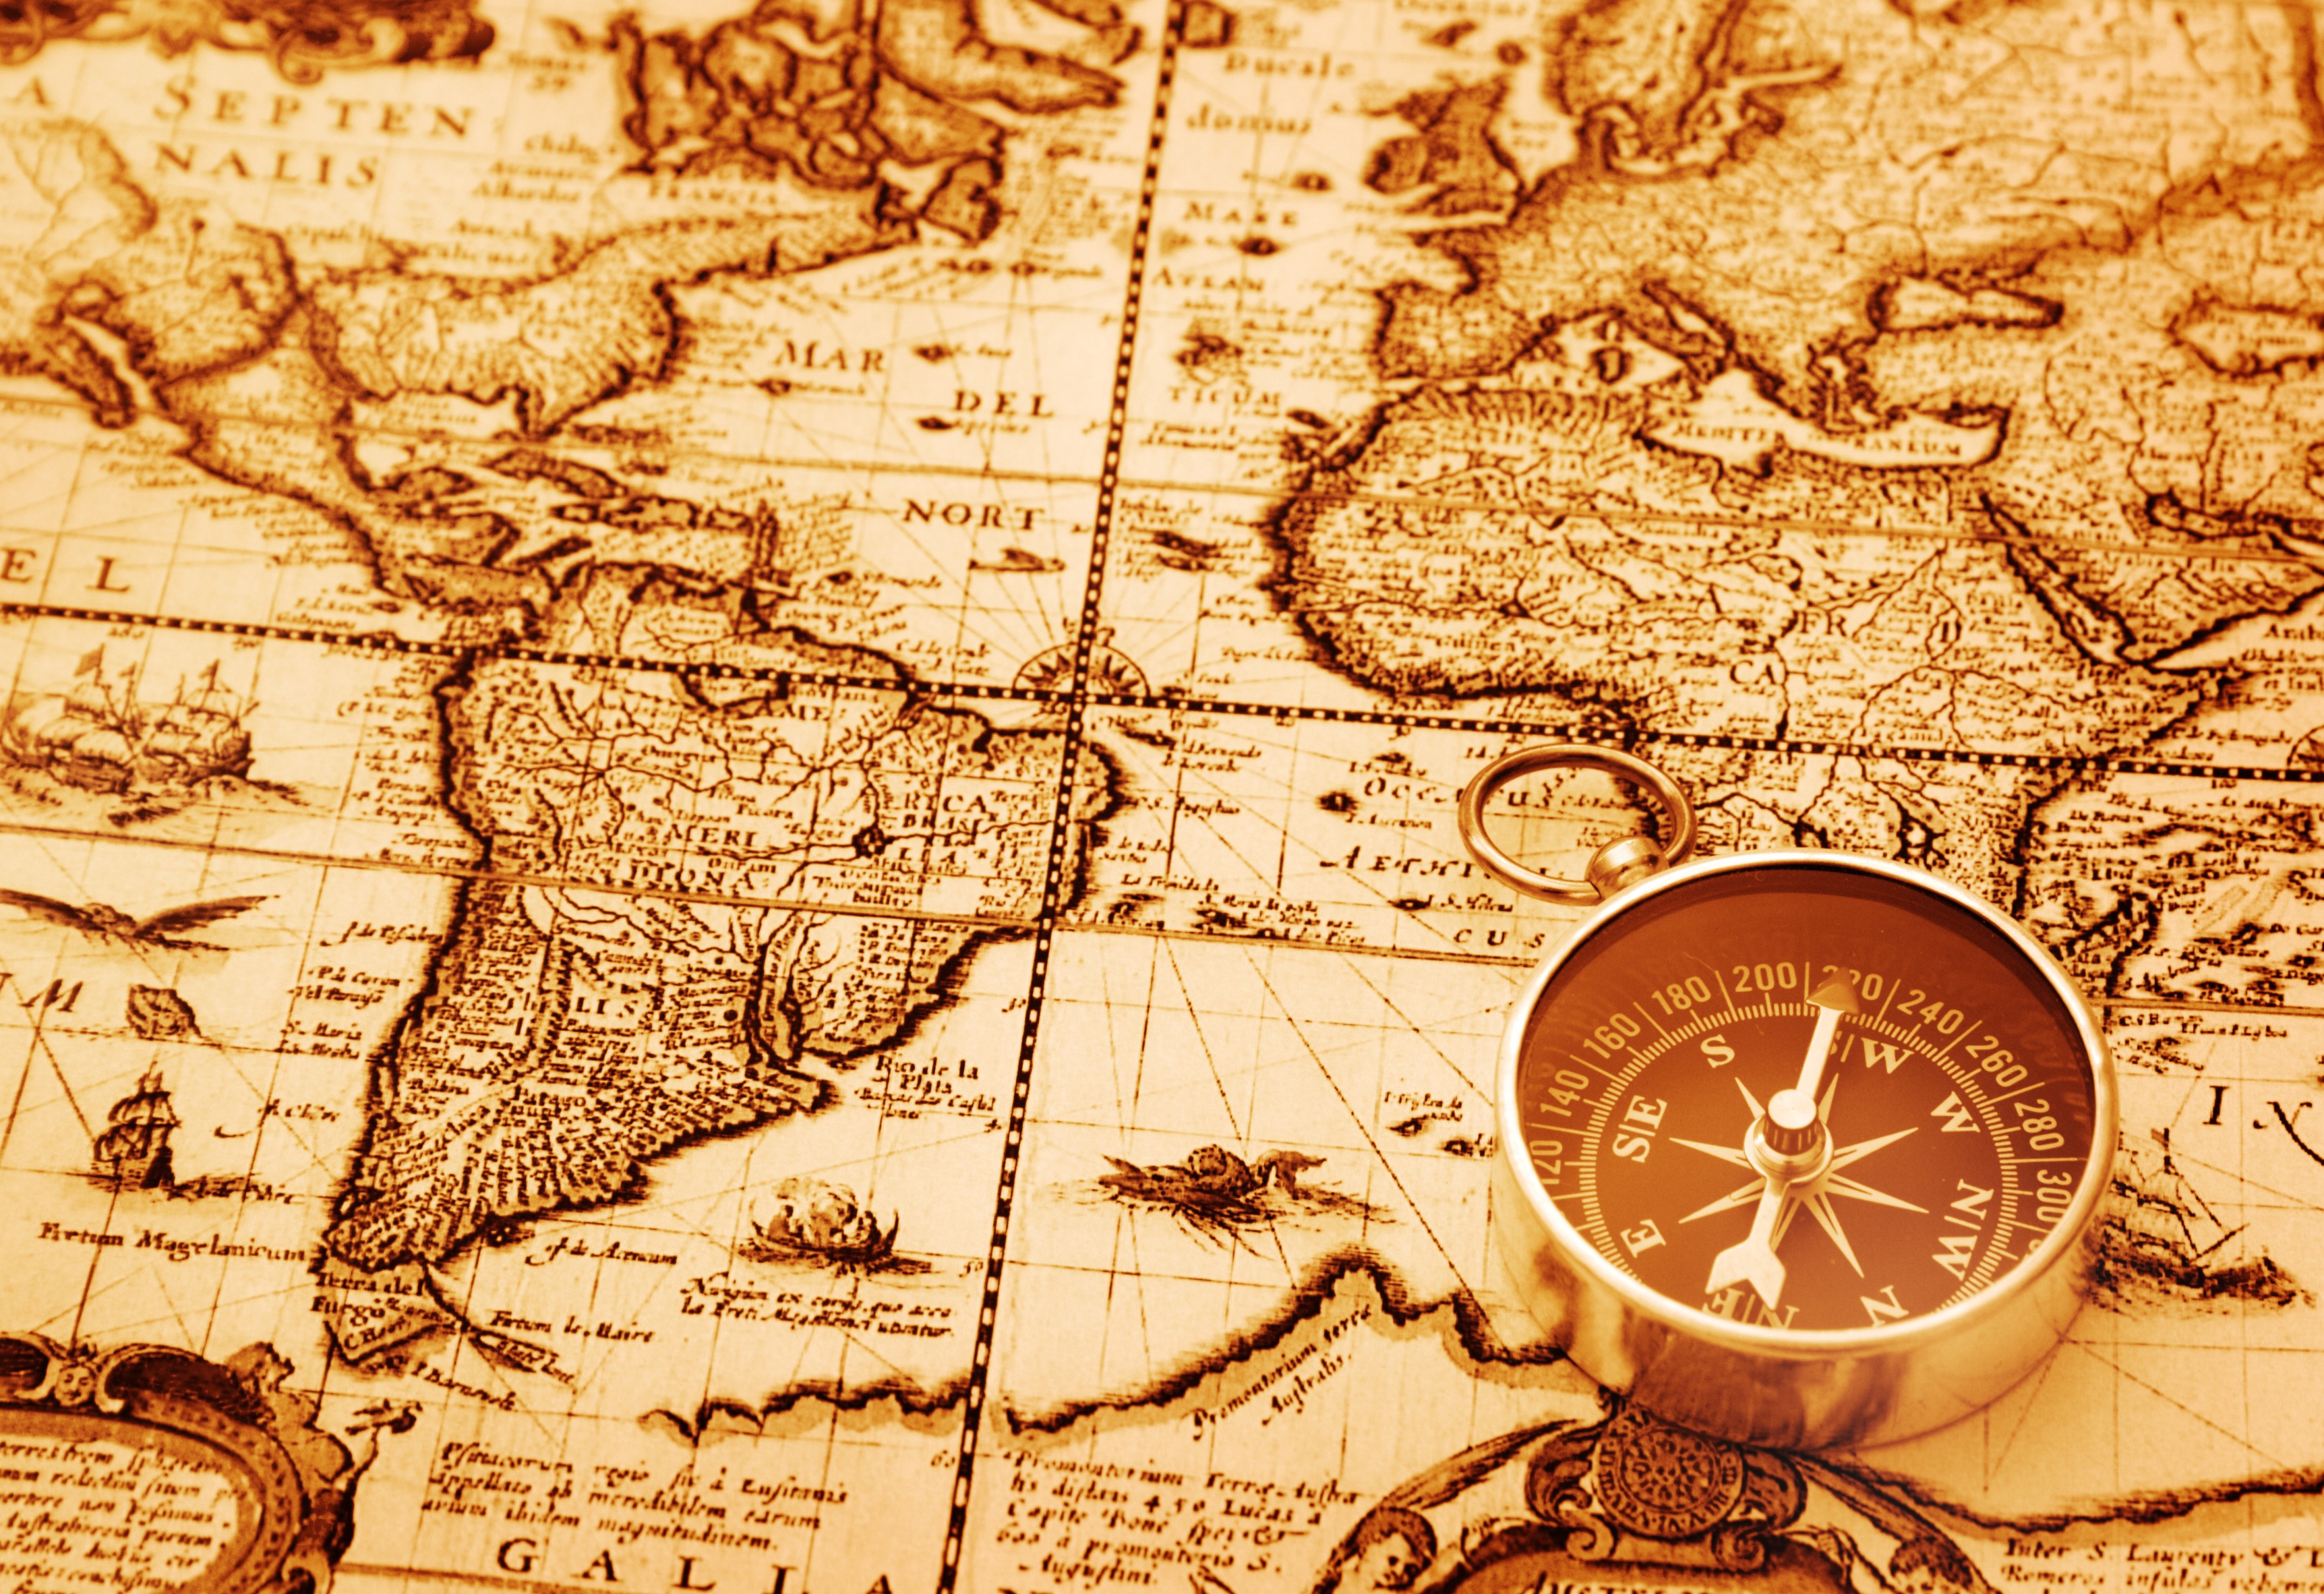 Misc World Map HD Wallpaper | Background Image